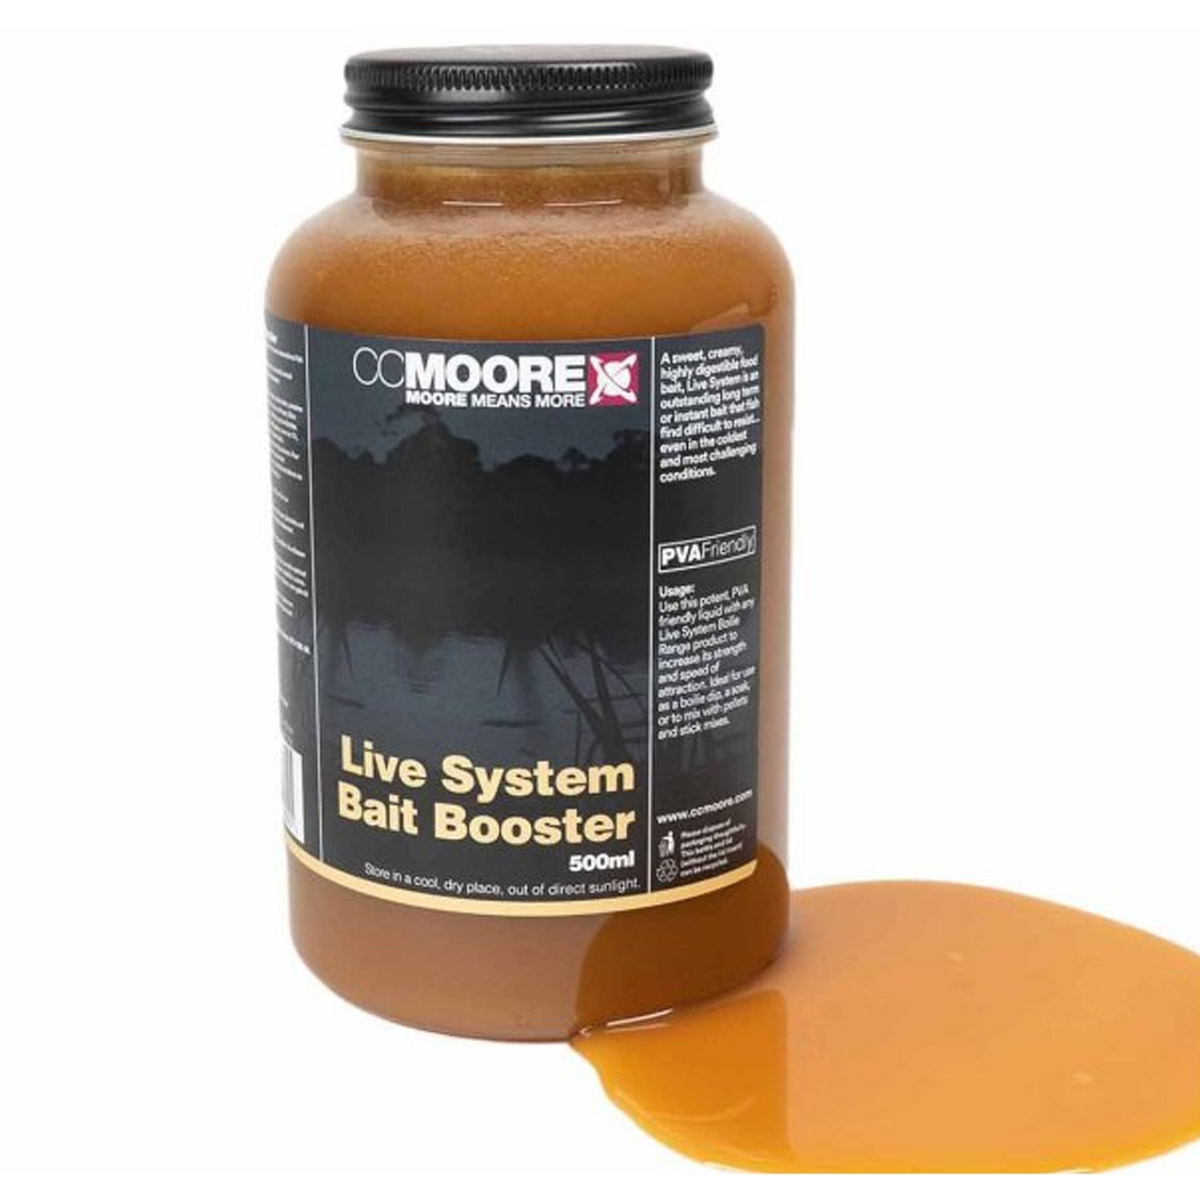 Cc Moore Live System Bait Booster 500ml